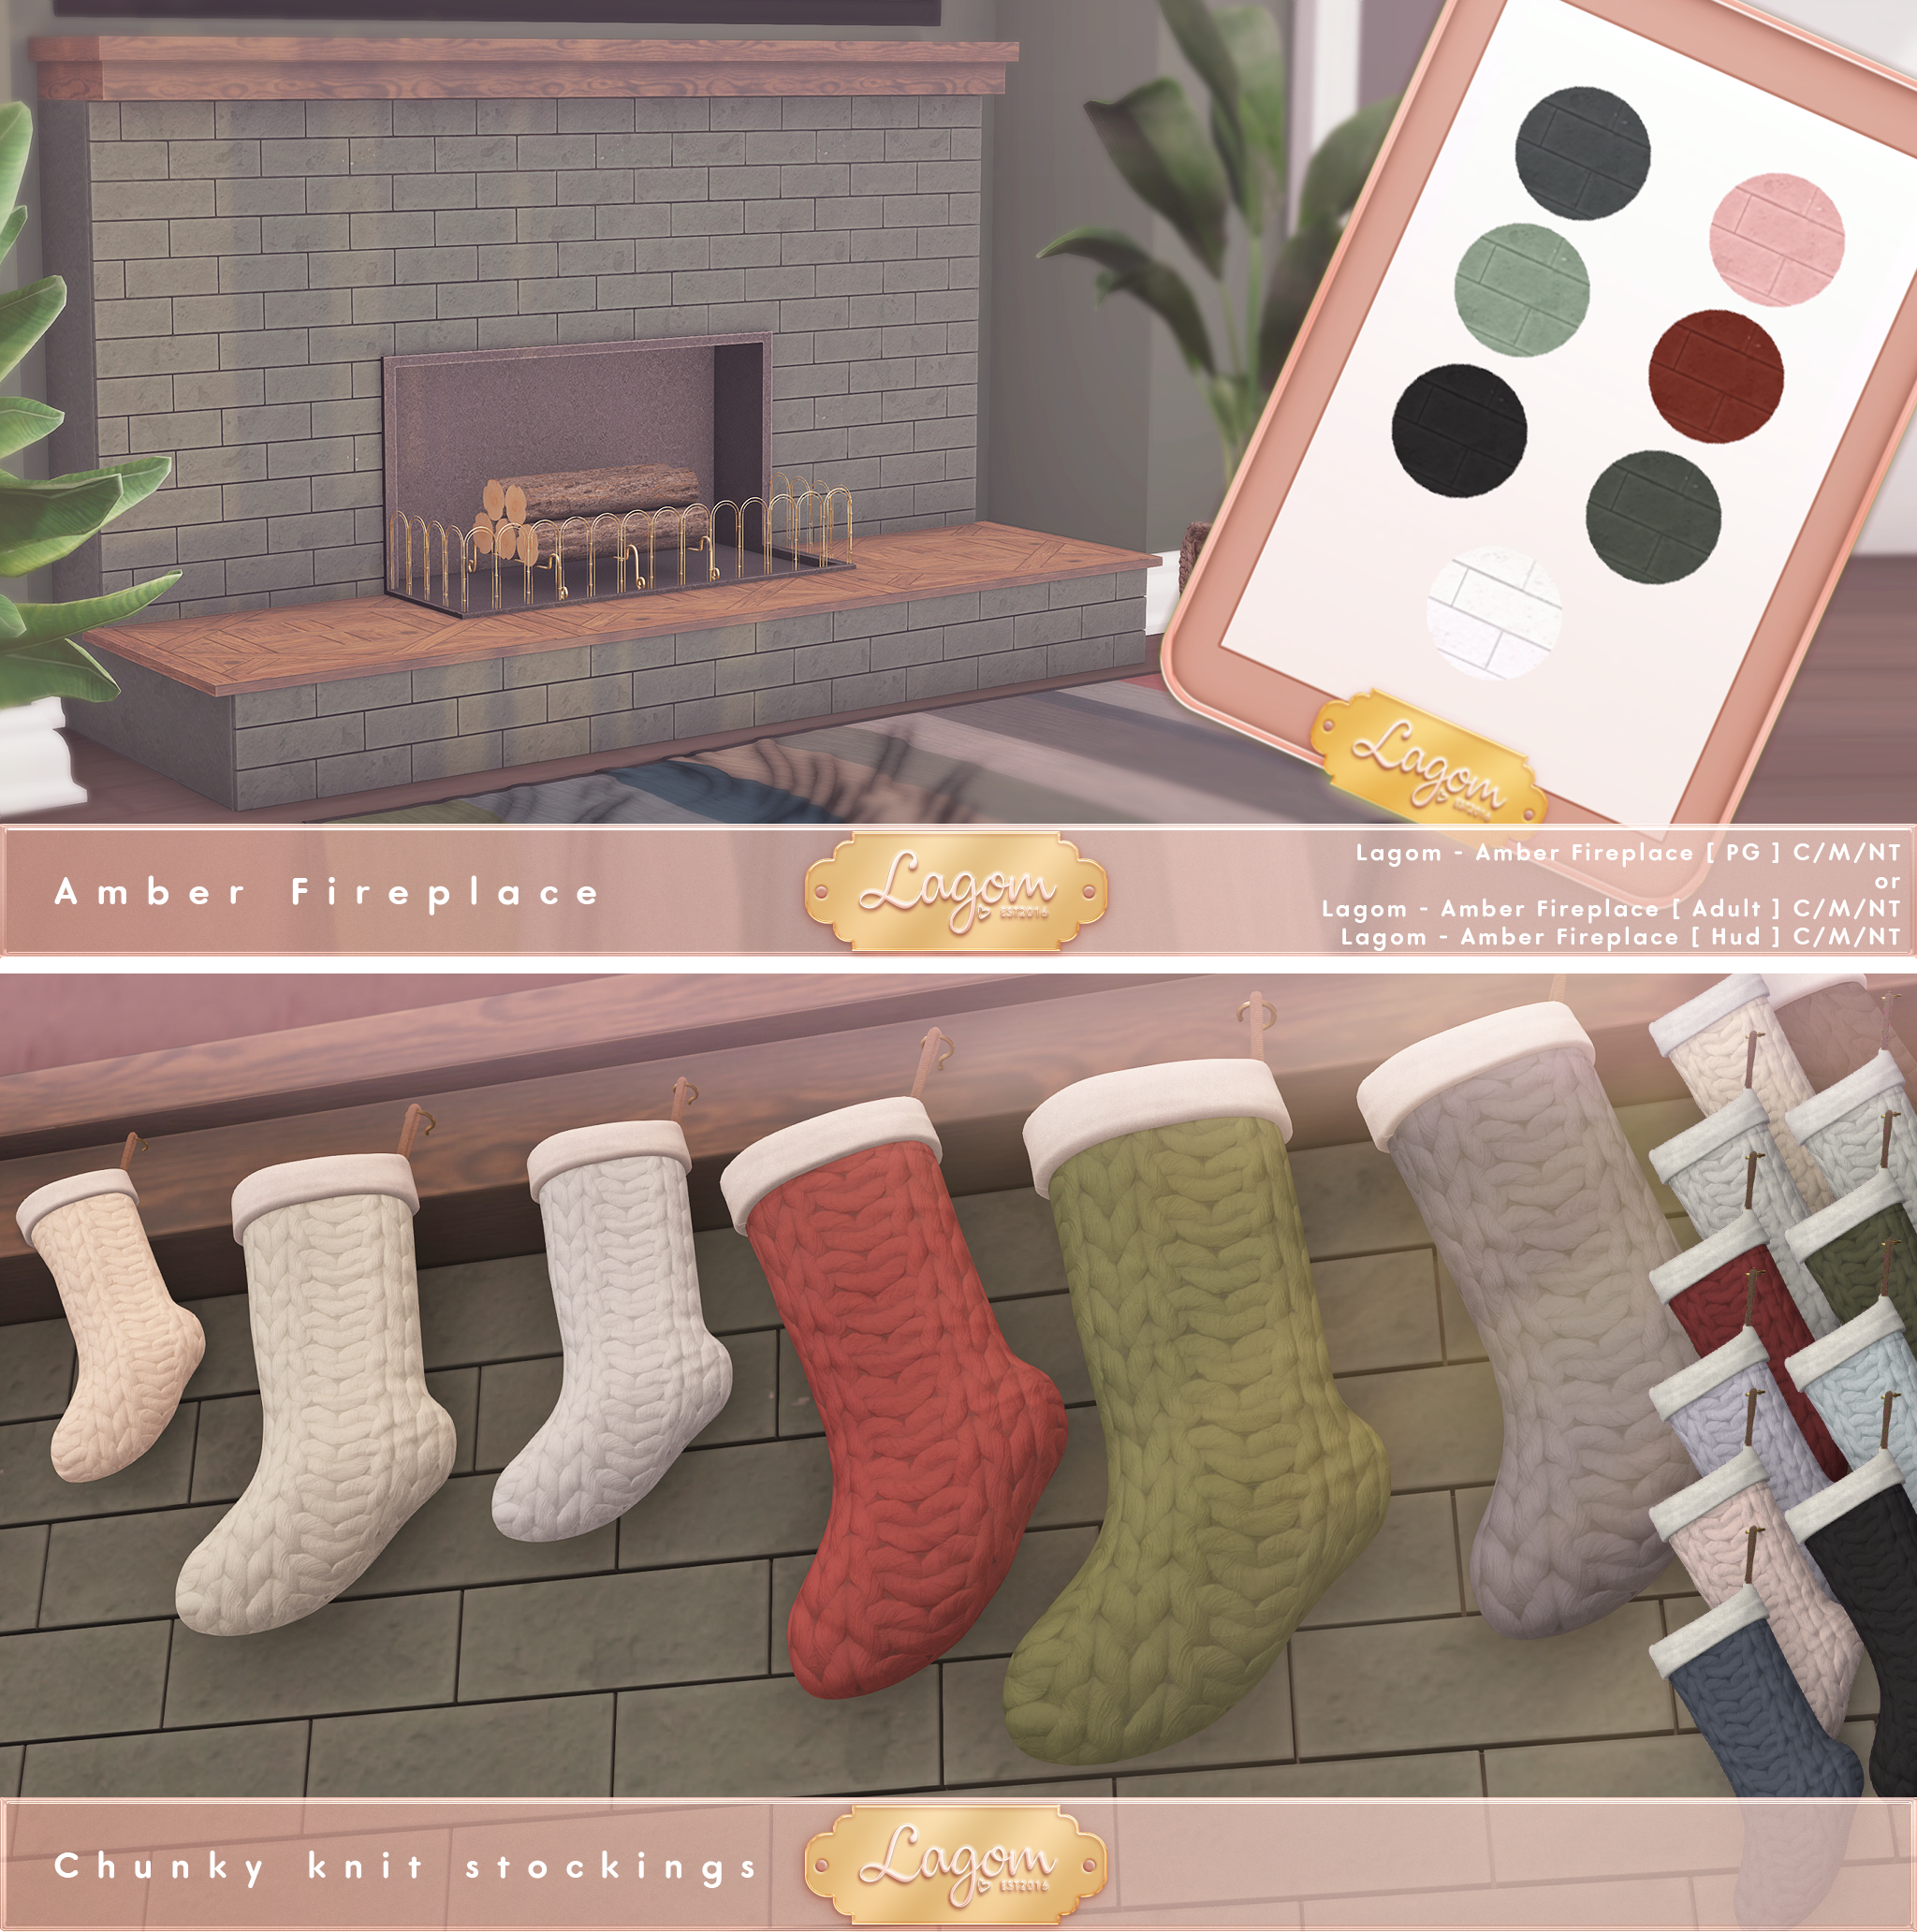 Lagom – Amber Fireplace and Chunky Knit Stockings